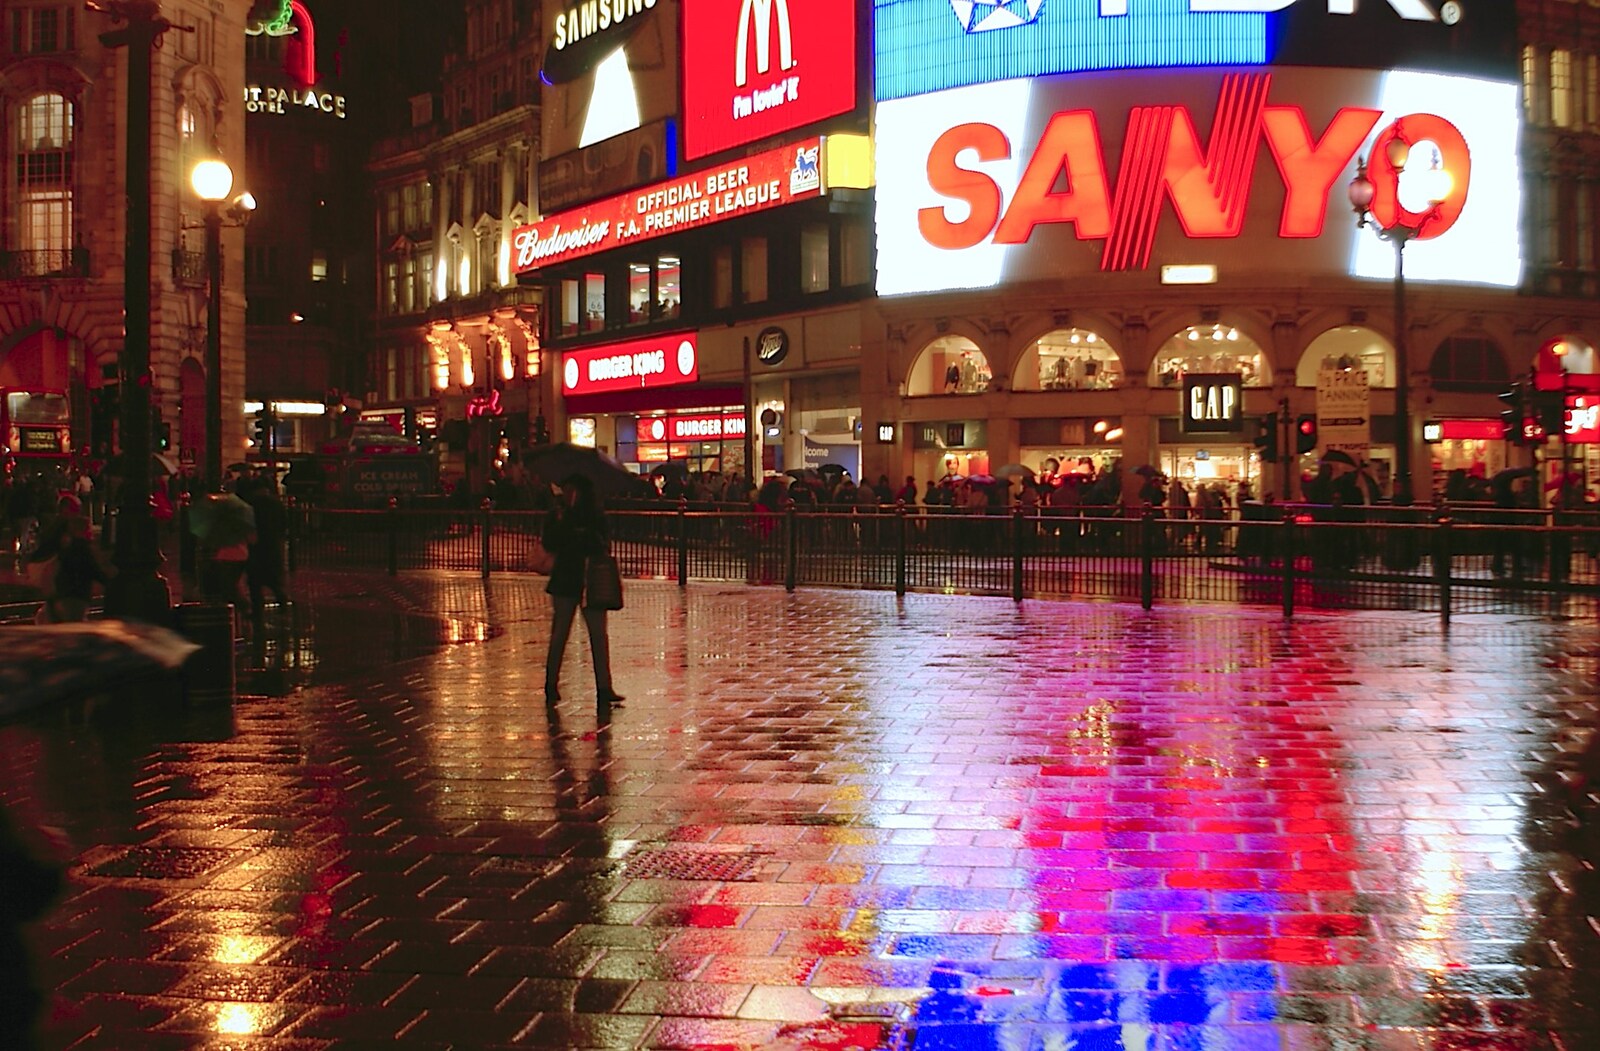 Picadilly Circus from London in the Rain - 18th November 2004